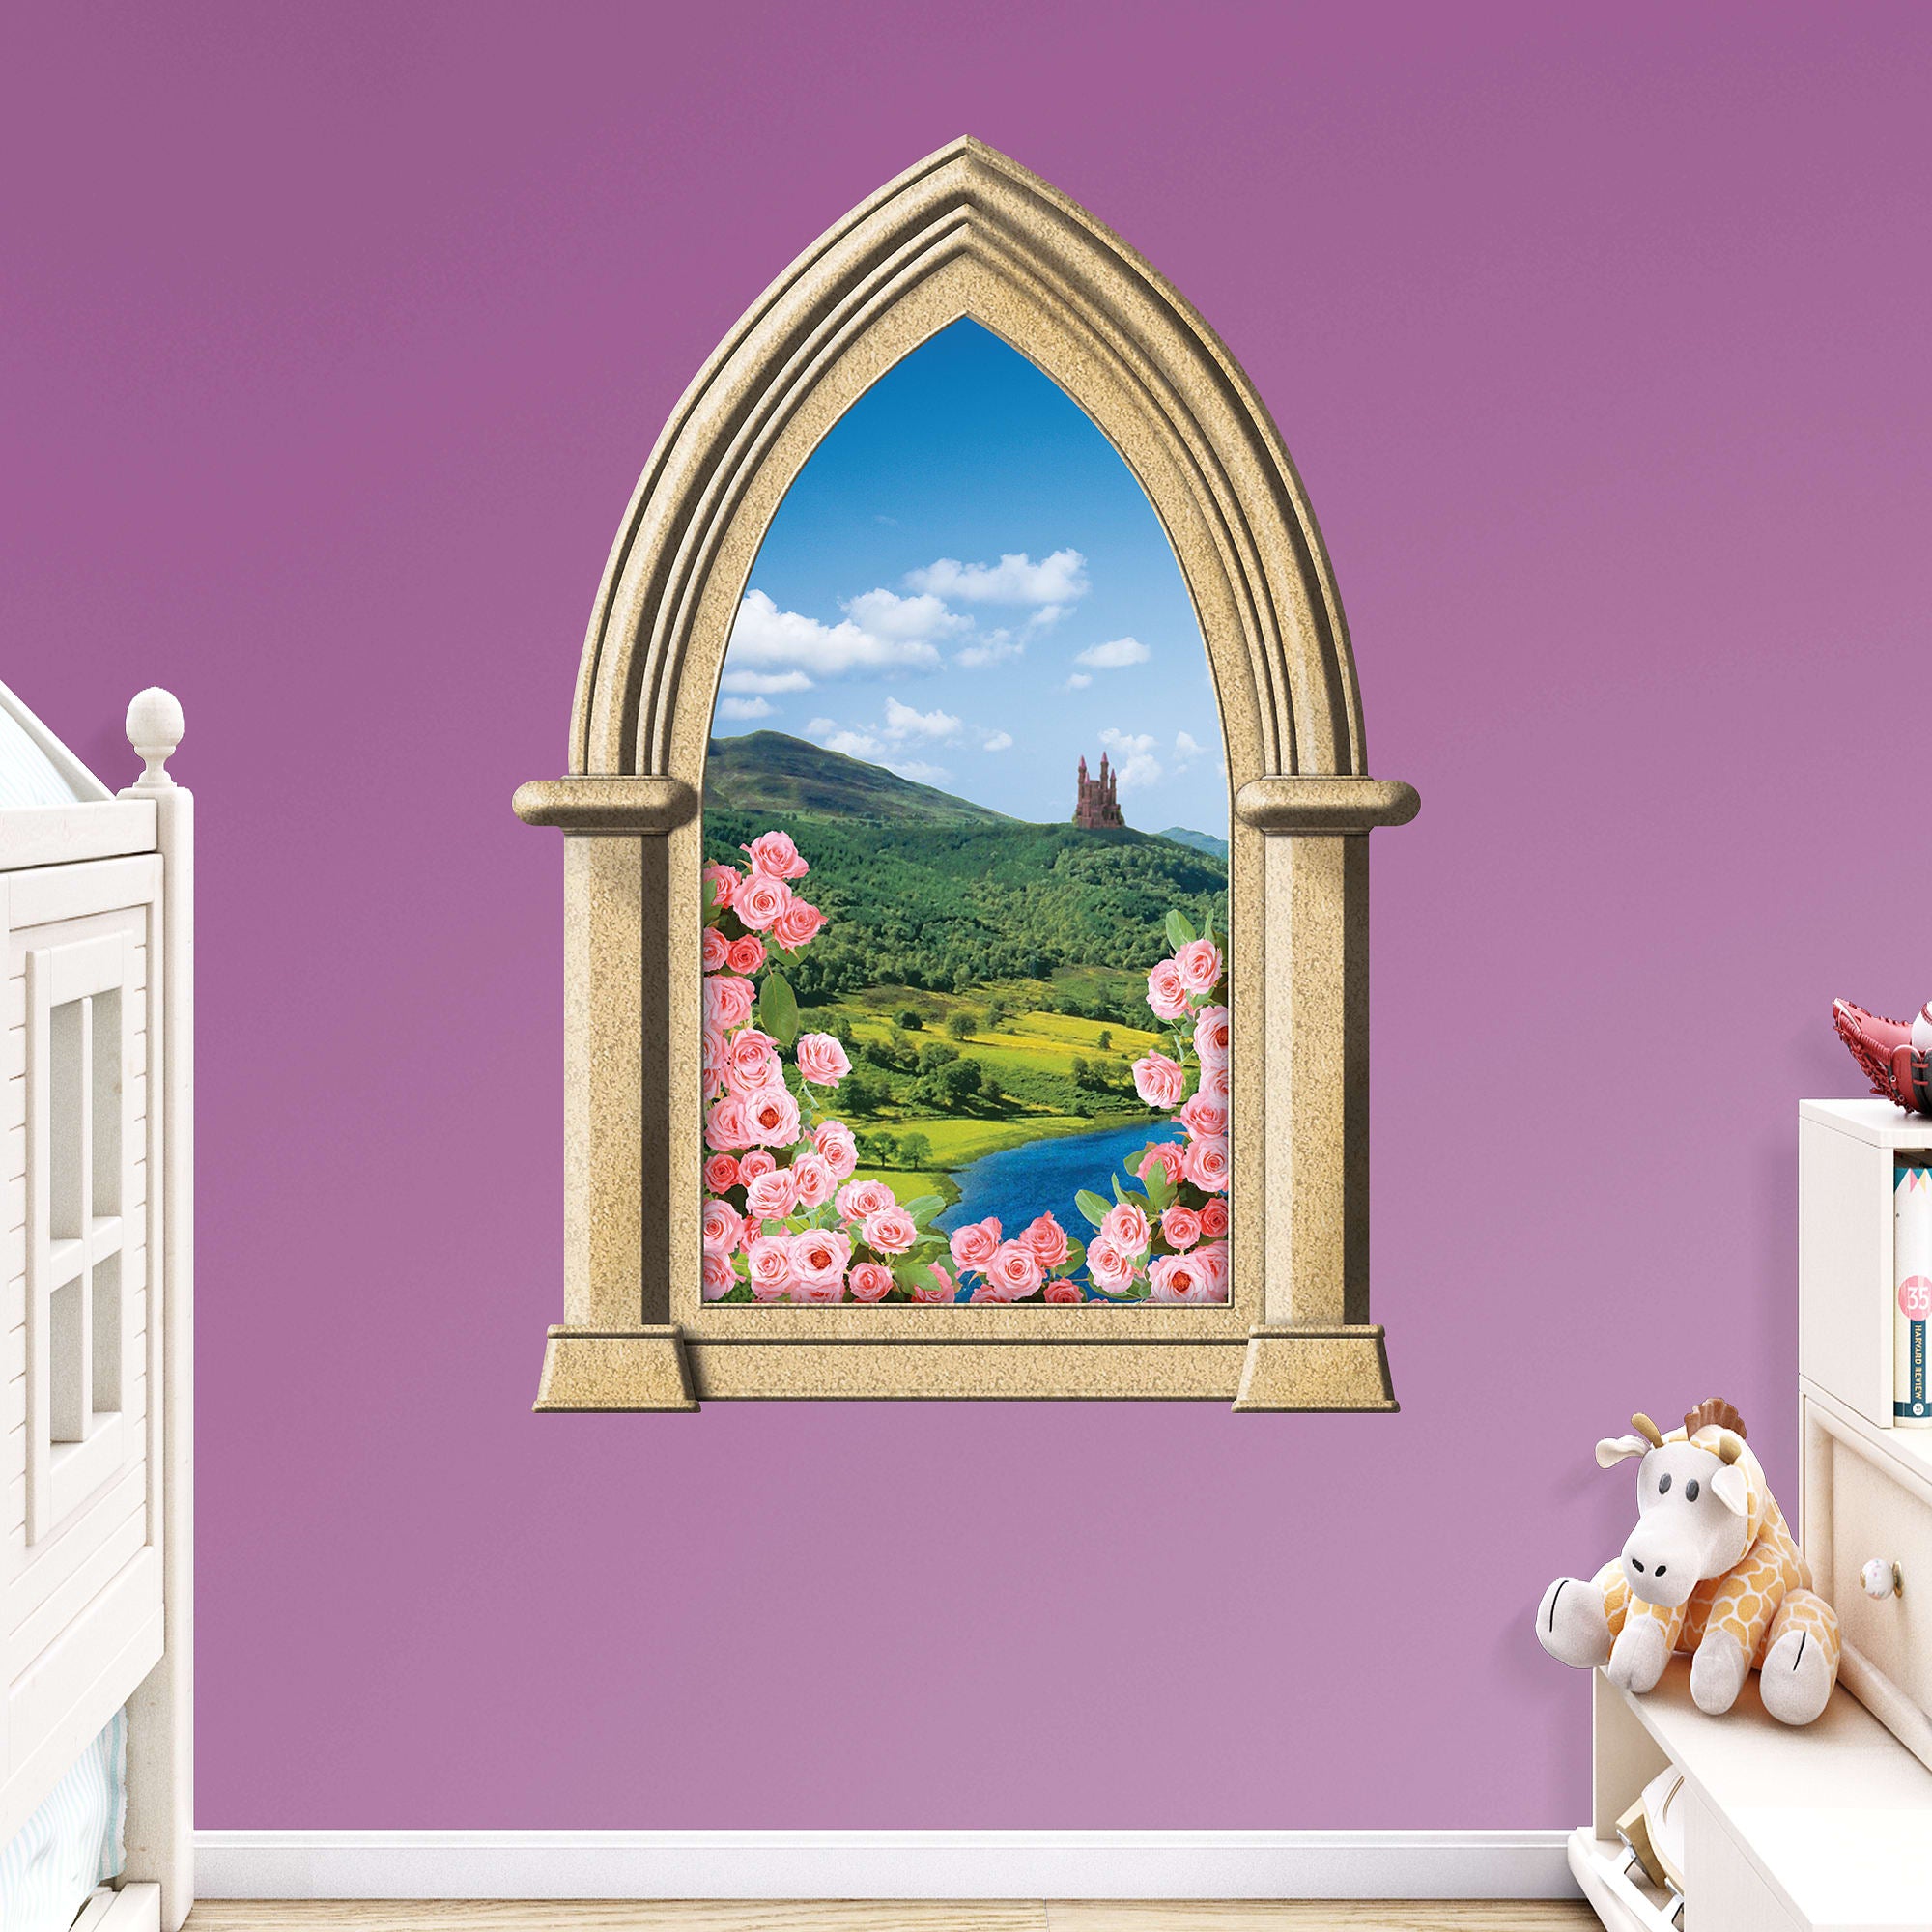 Instant Window: Fairy Tale Castle - Removable Wall Graphic 37.0"W x 51.0"H by Fathead | Vinyl